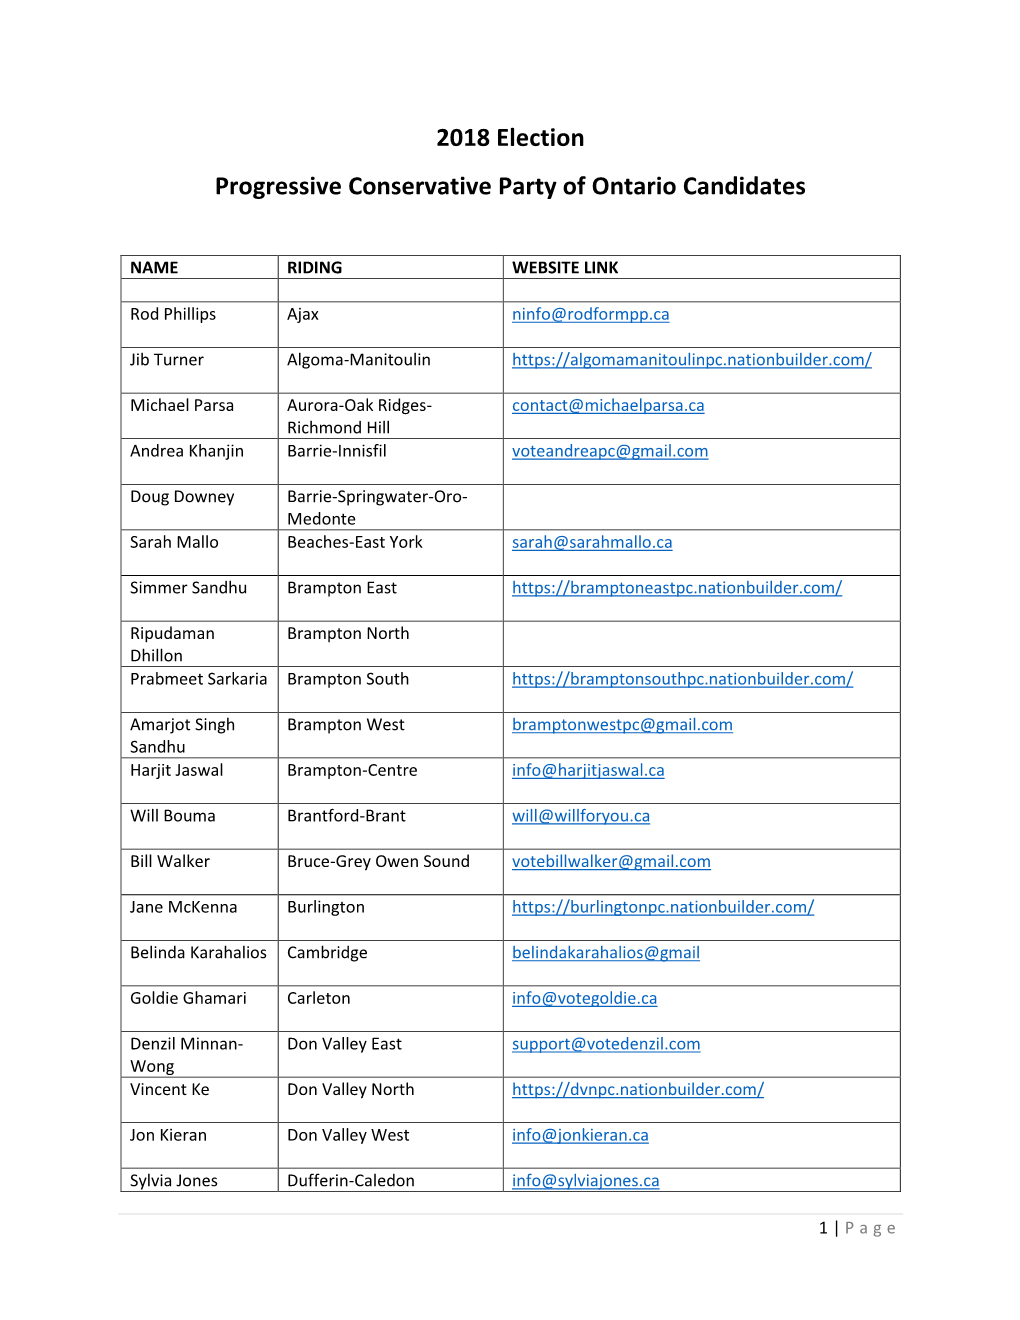 2018 Election Progressive Conservative Party of Ontario Candidates